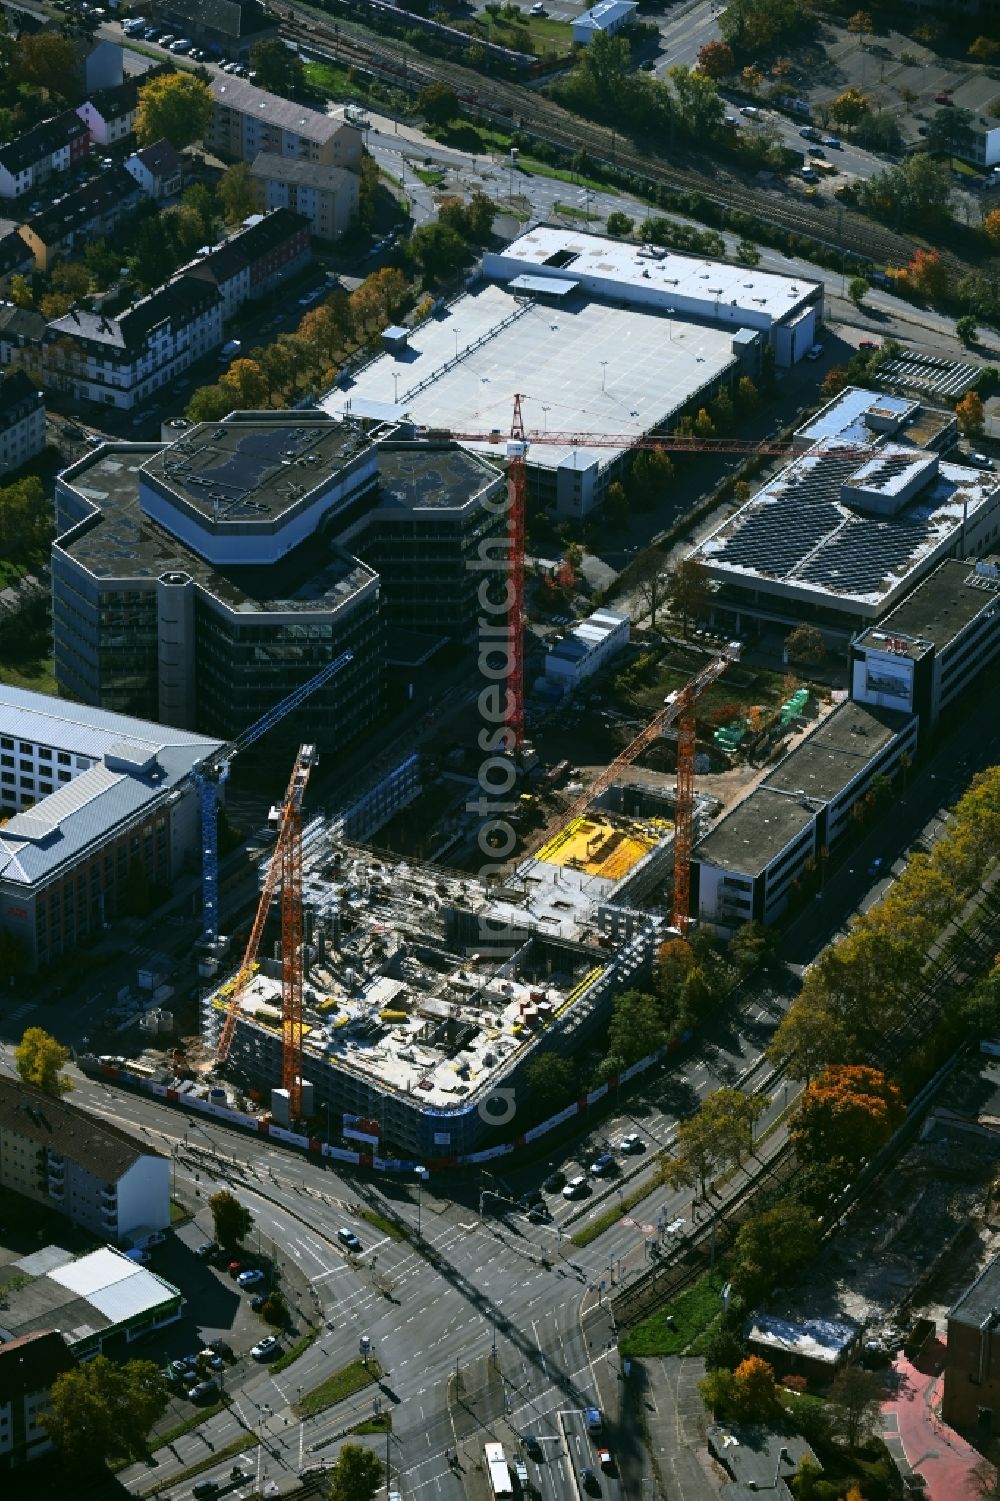 Aerial image Mannheim - Construction site for new high-rise building complex Rollbuehlstrasse corner Kallstadter Strasse in the district Kaefertal in Mannheim in the state Baden-Wuerttemberg, Germany